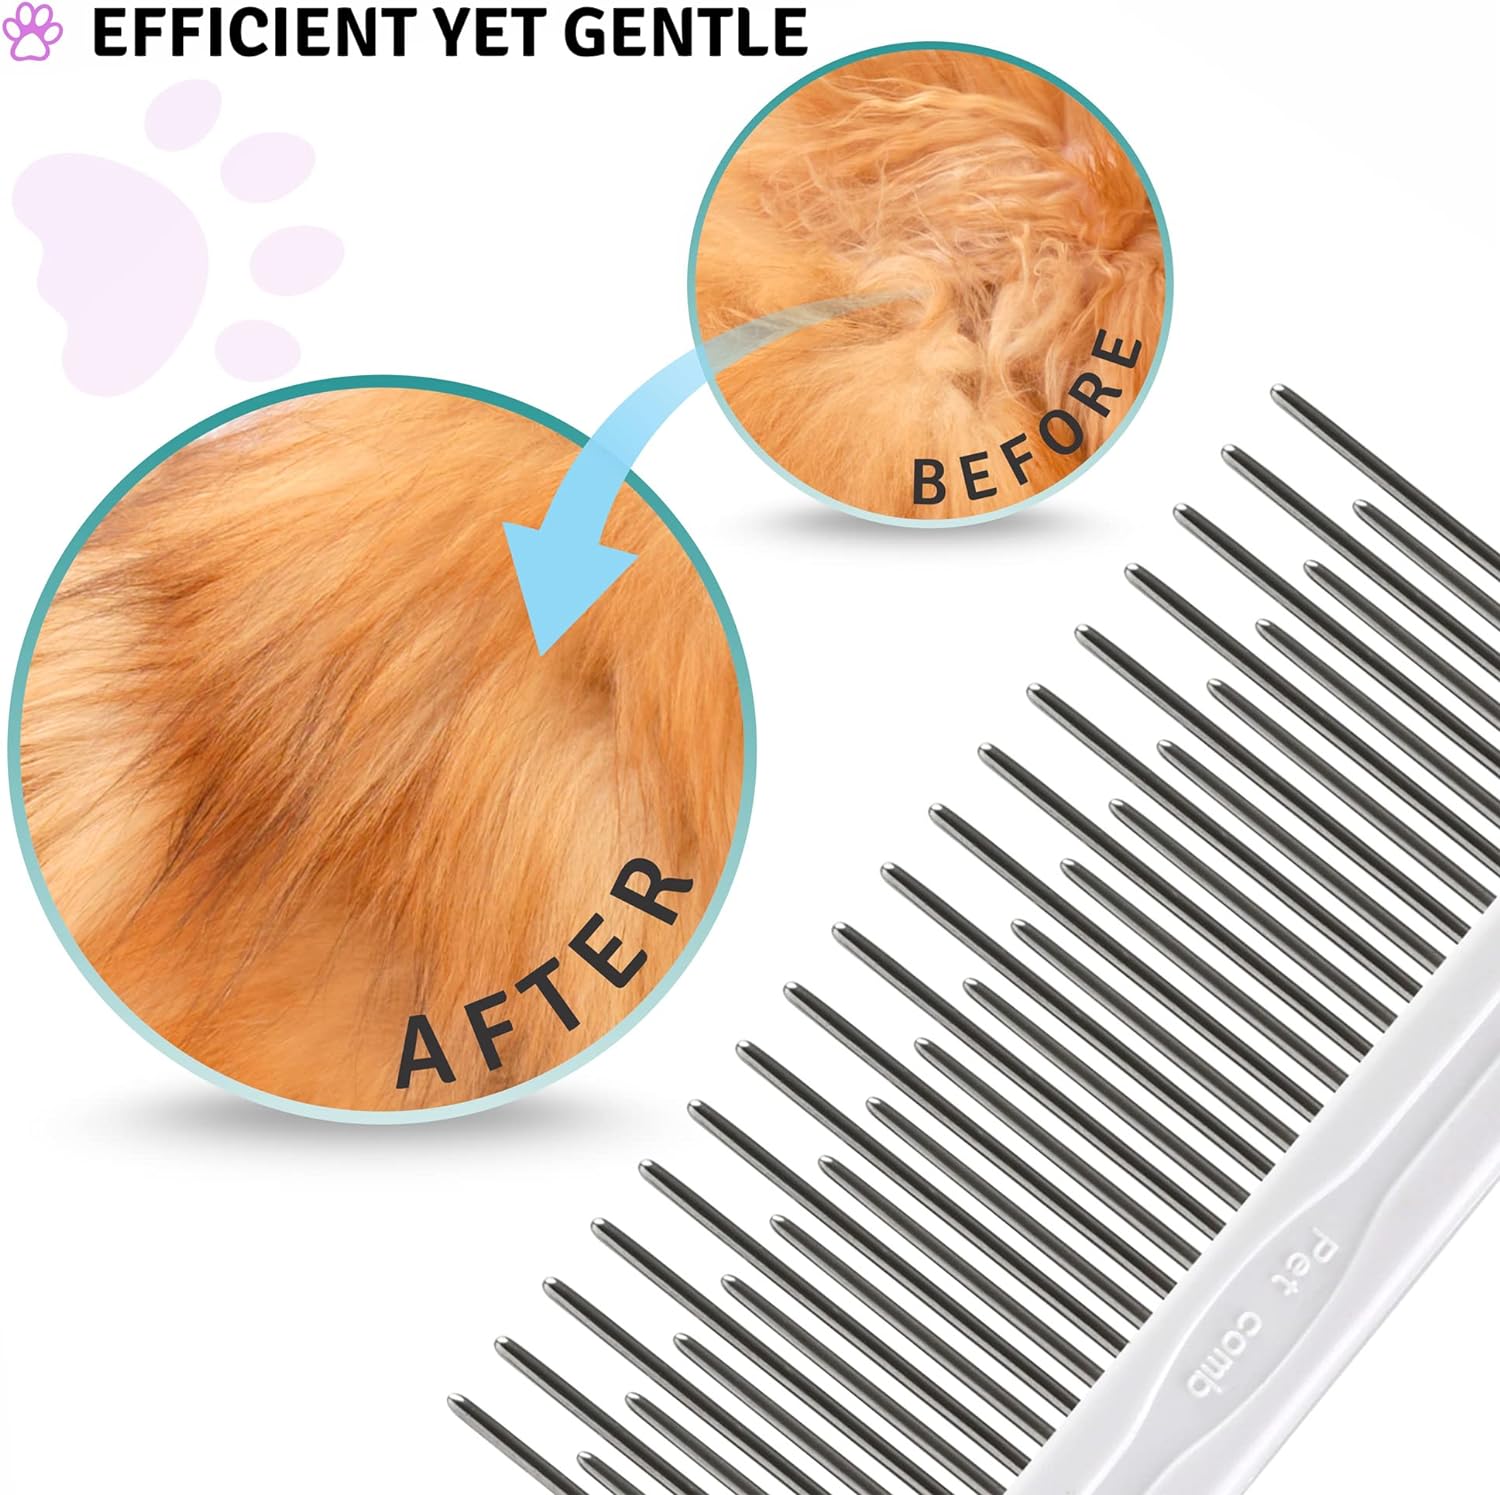 Poodle Pet 2-in-1 Stainless Steel Detangler Comb Cat & Dog Grooming Brush - image 3 of 9